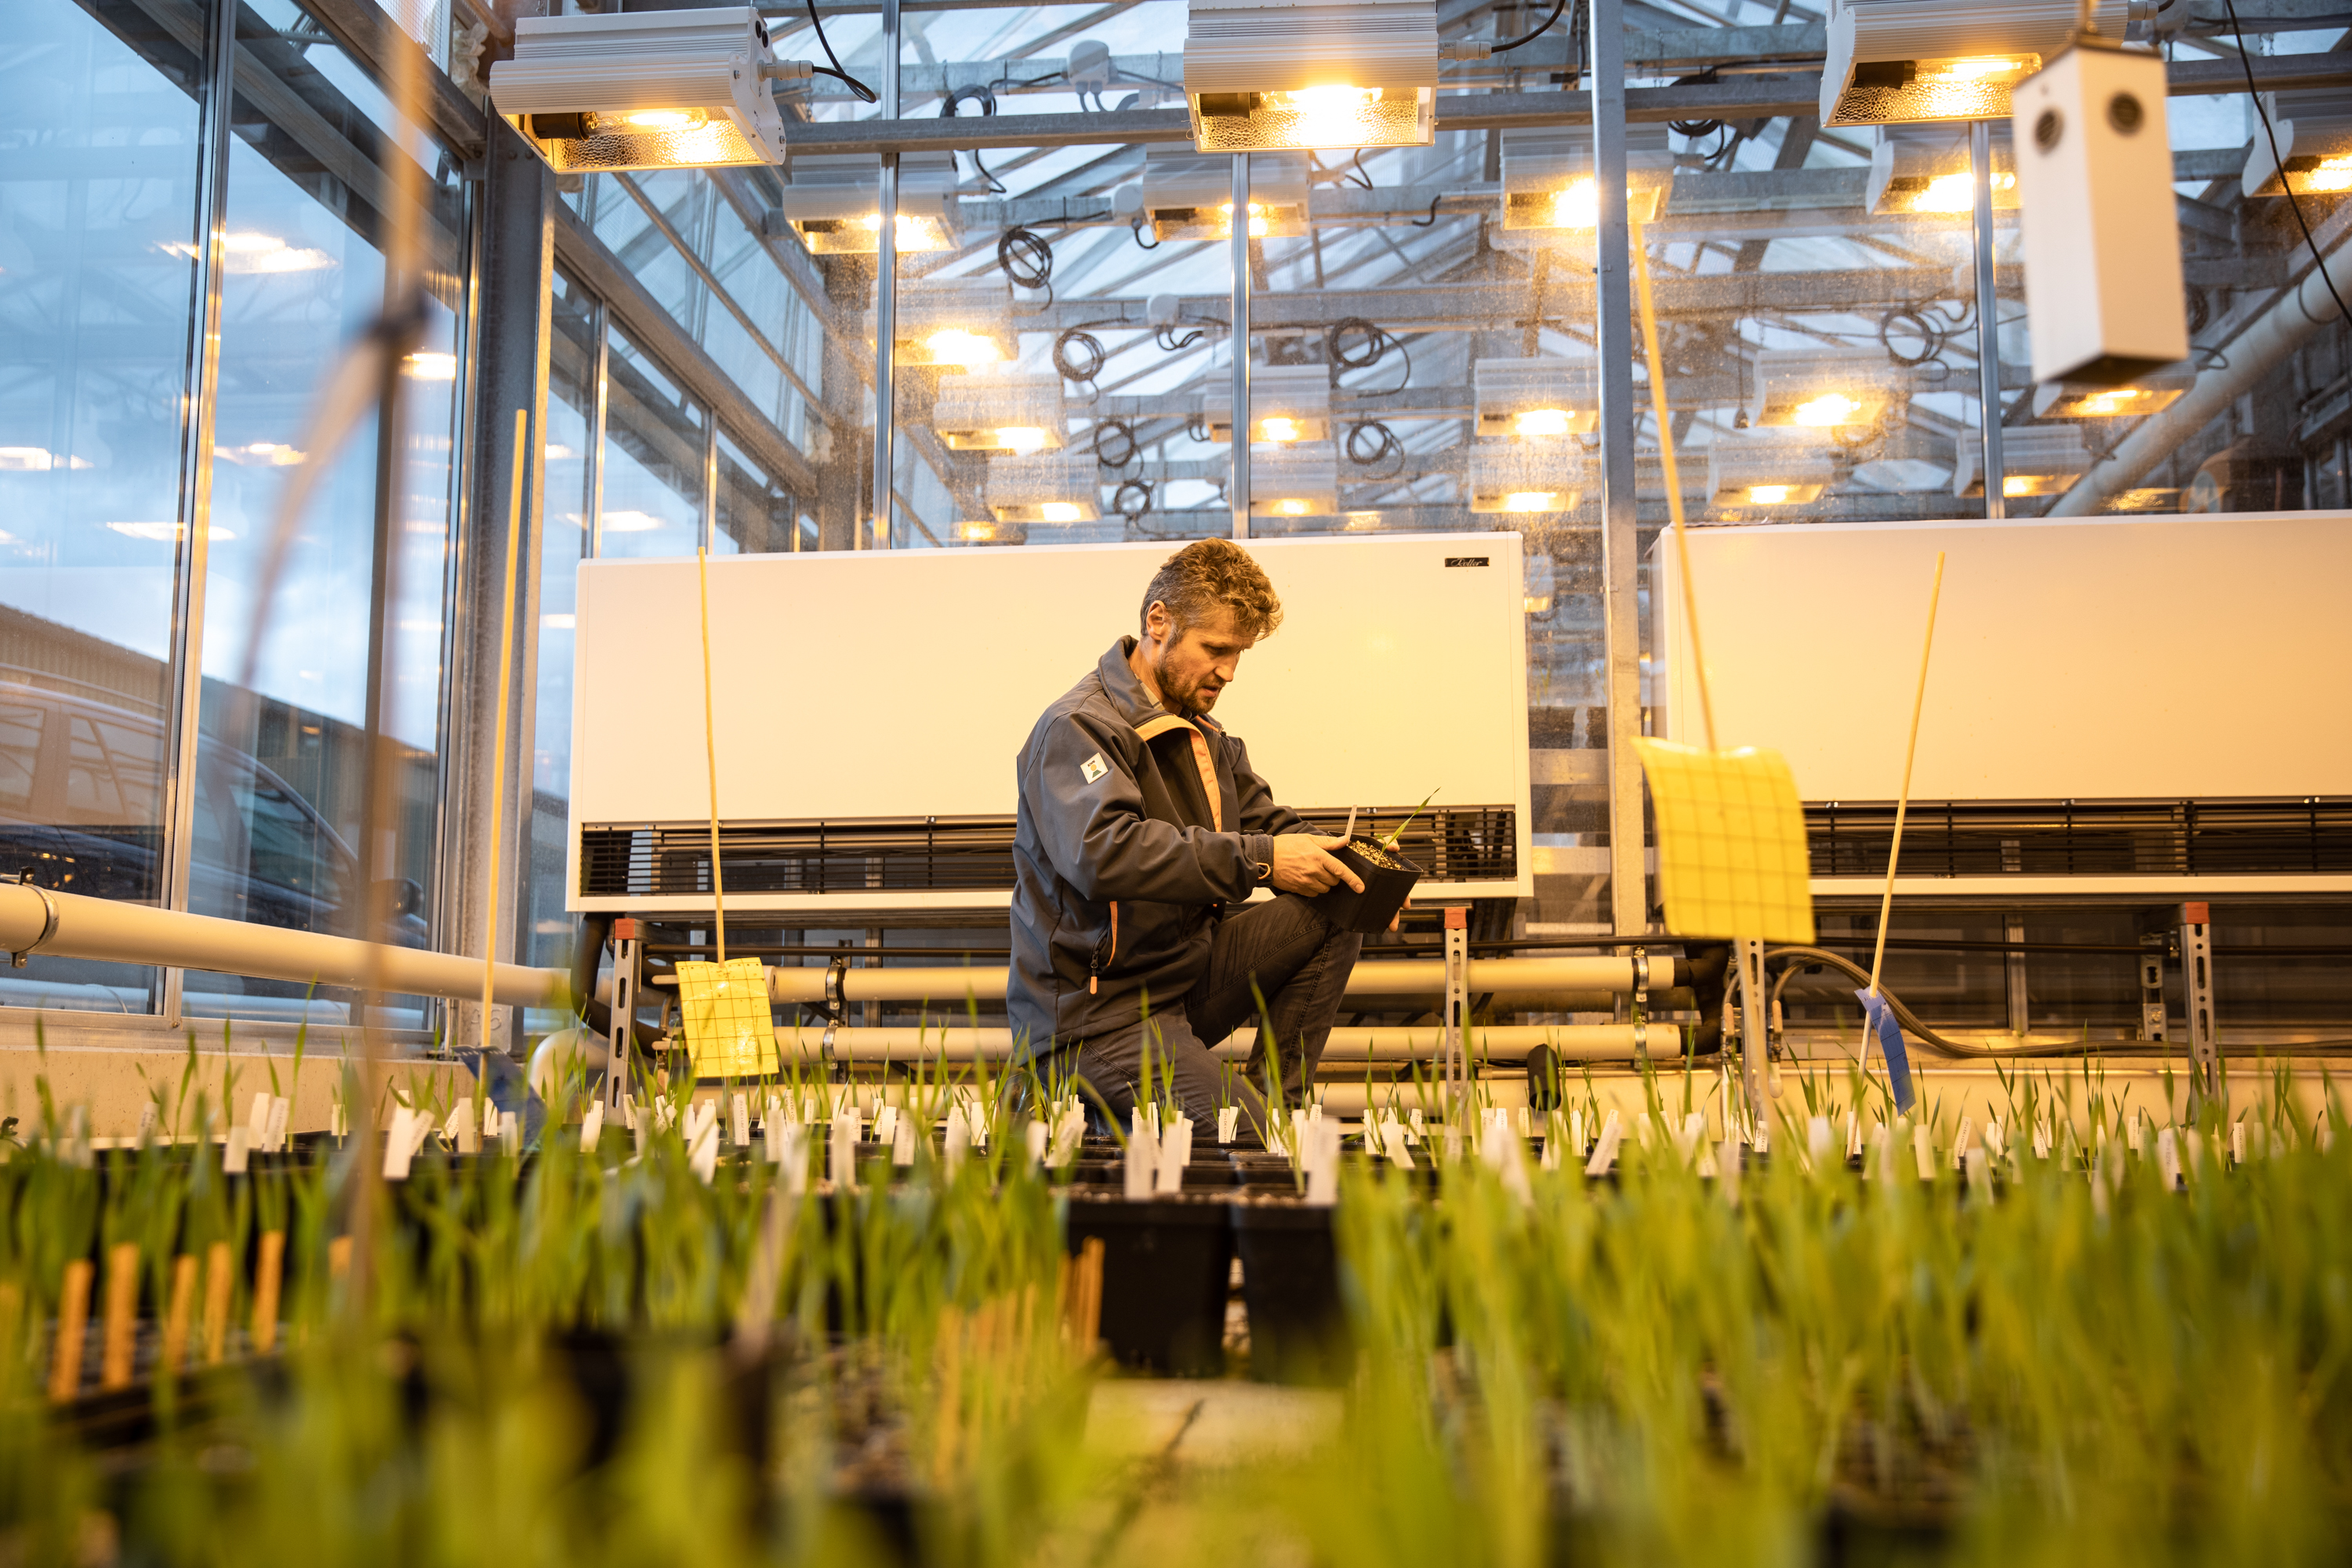 Klaus Oldach inspects the growth of the barley plants in the greenhouse.